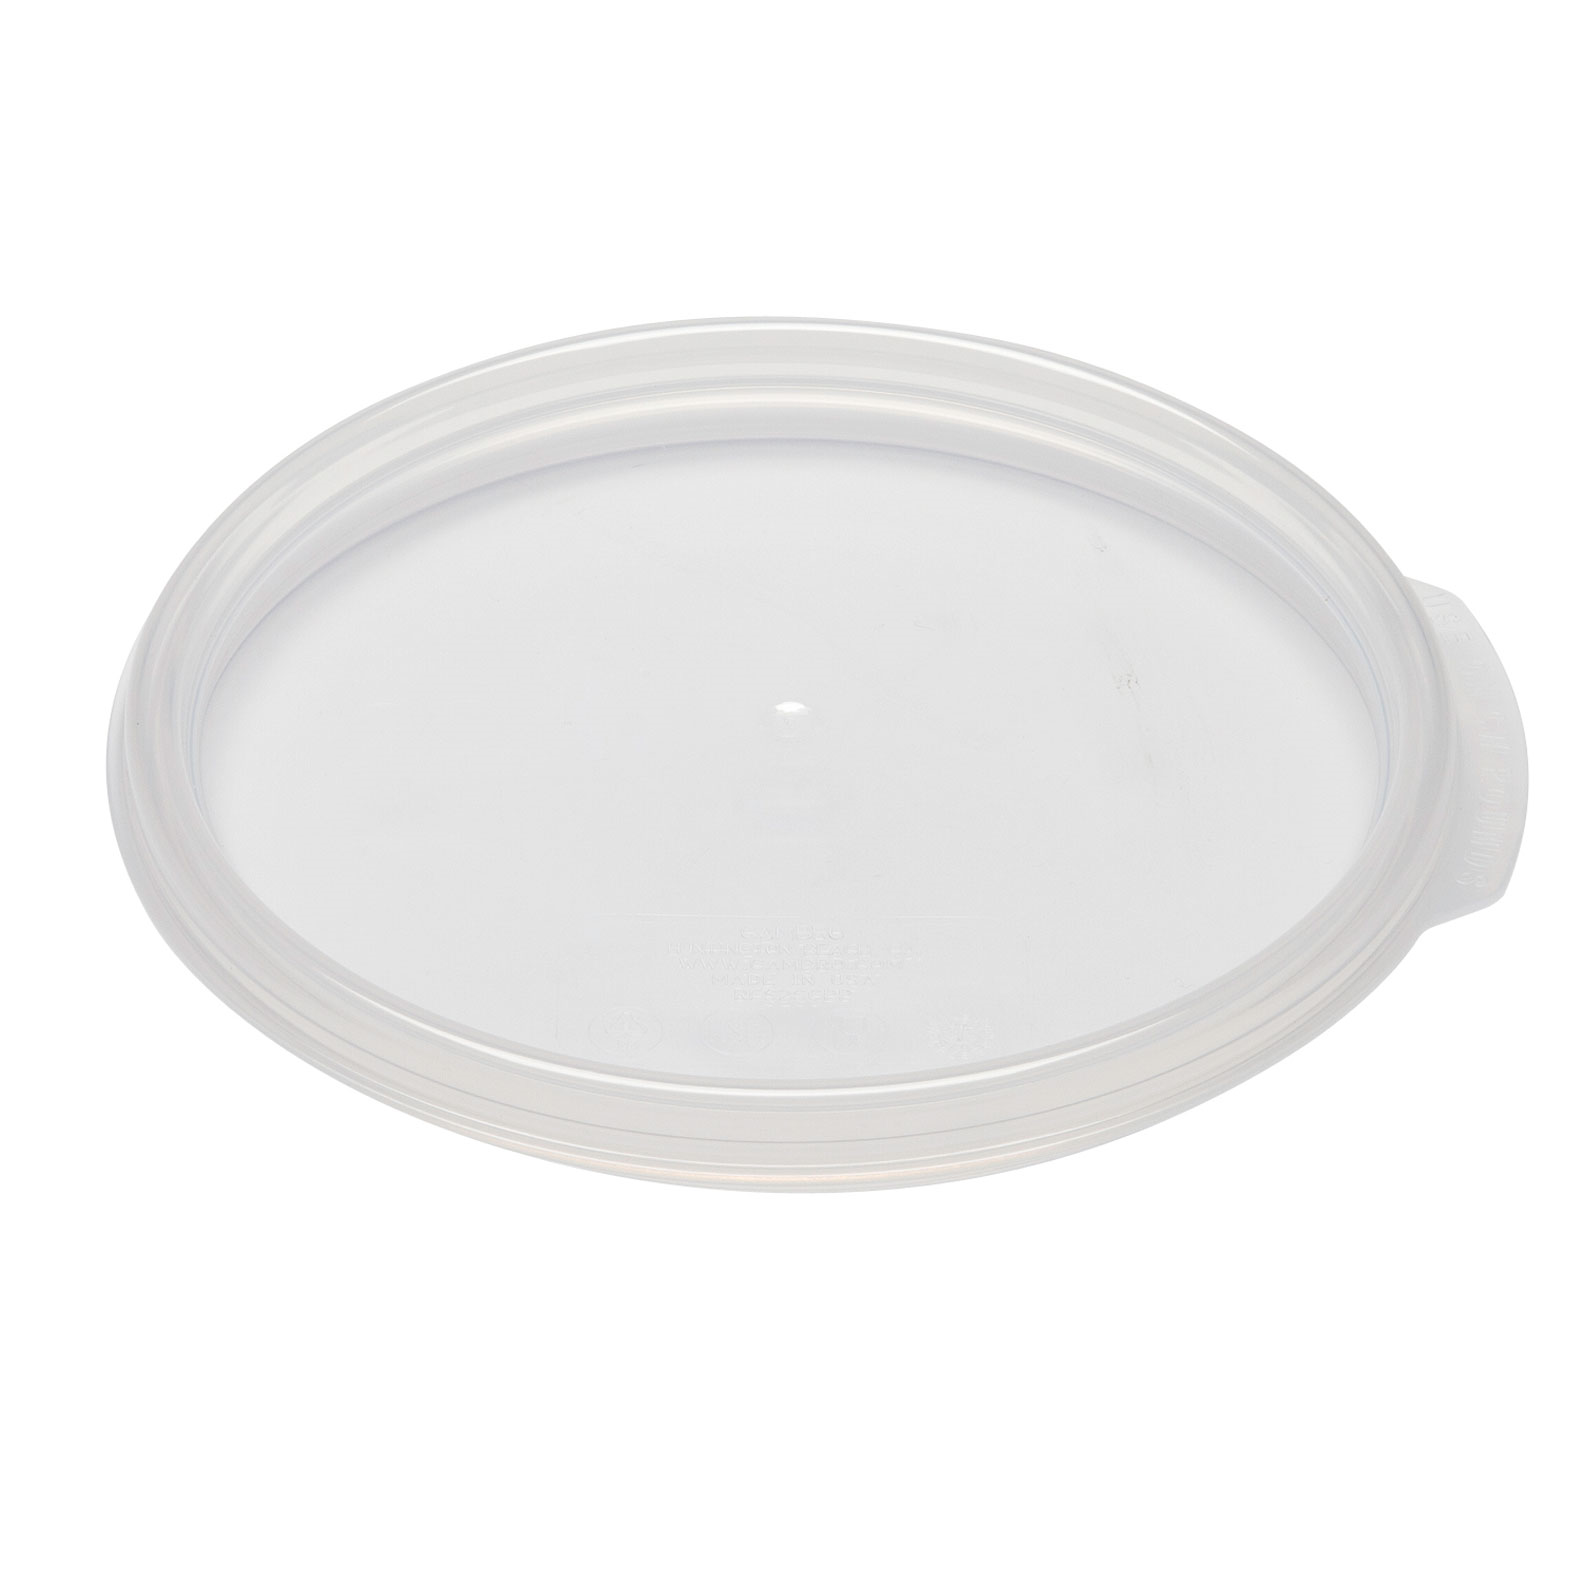 SEAL COVER FOR CW CLEAR 2&amp;4qt. ROUND FOOD CONTAINERS,